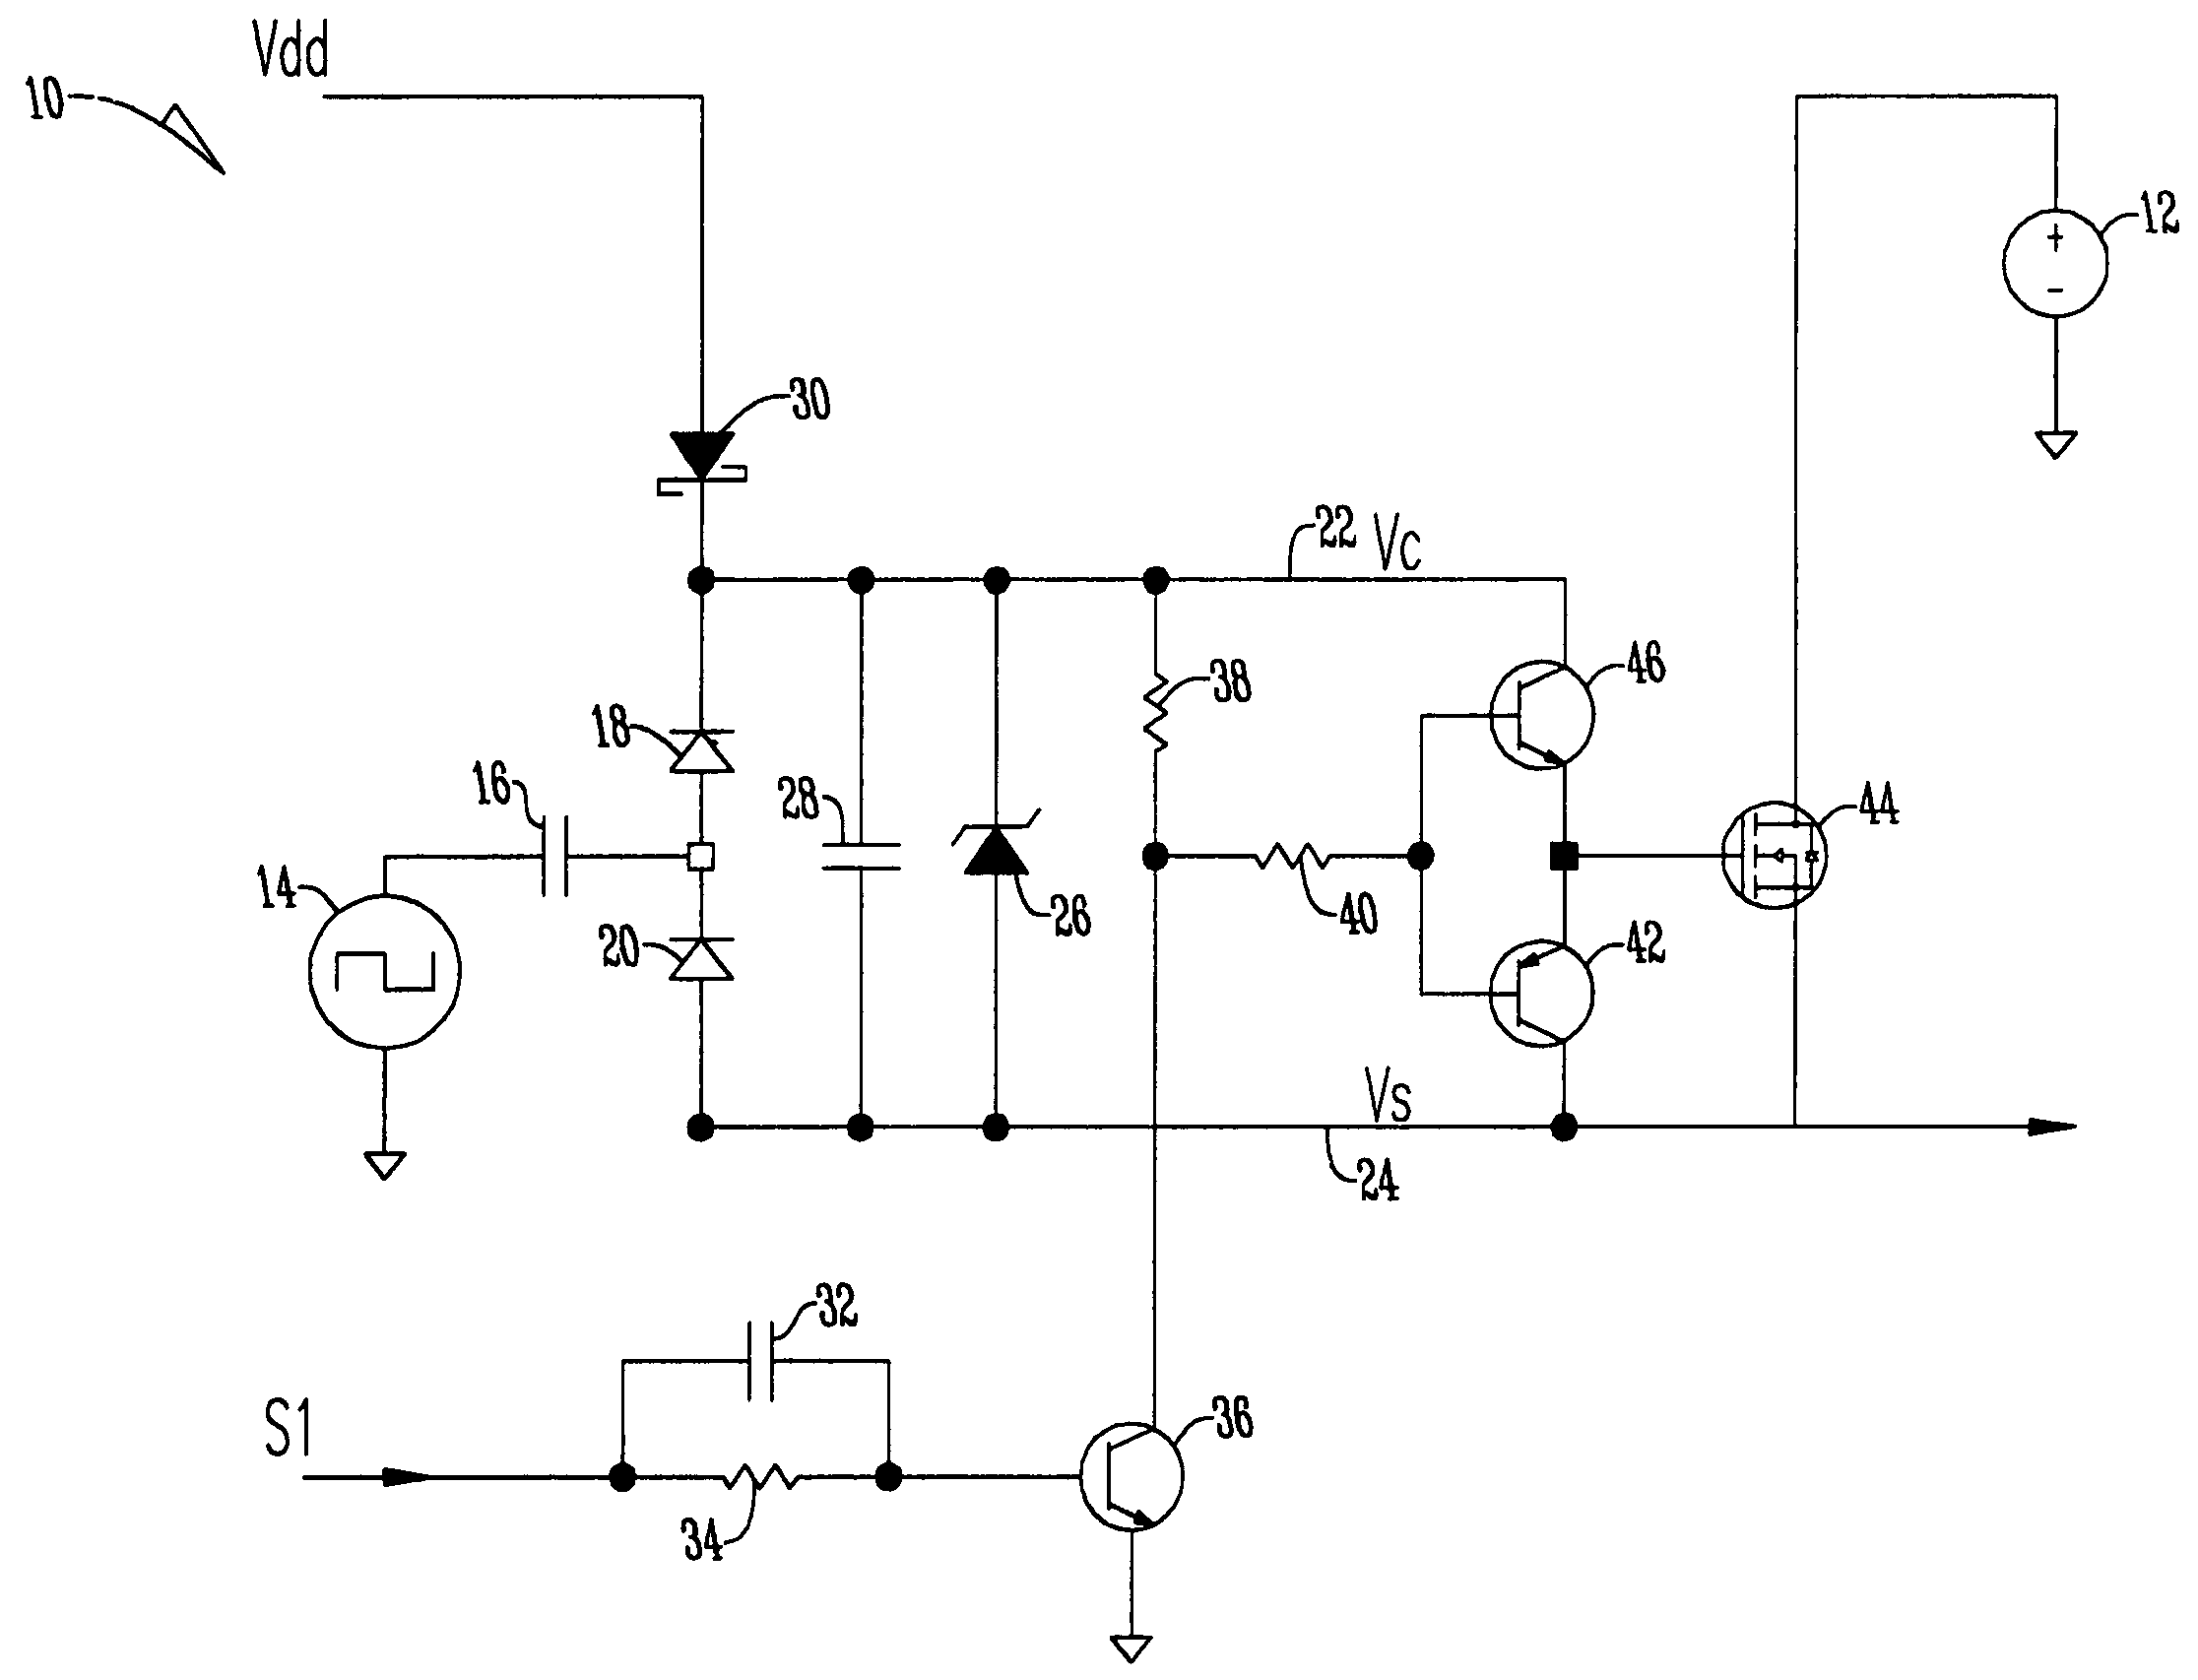 High side NFET gate driving circuit